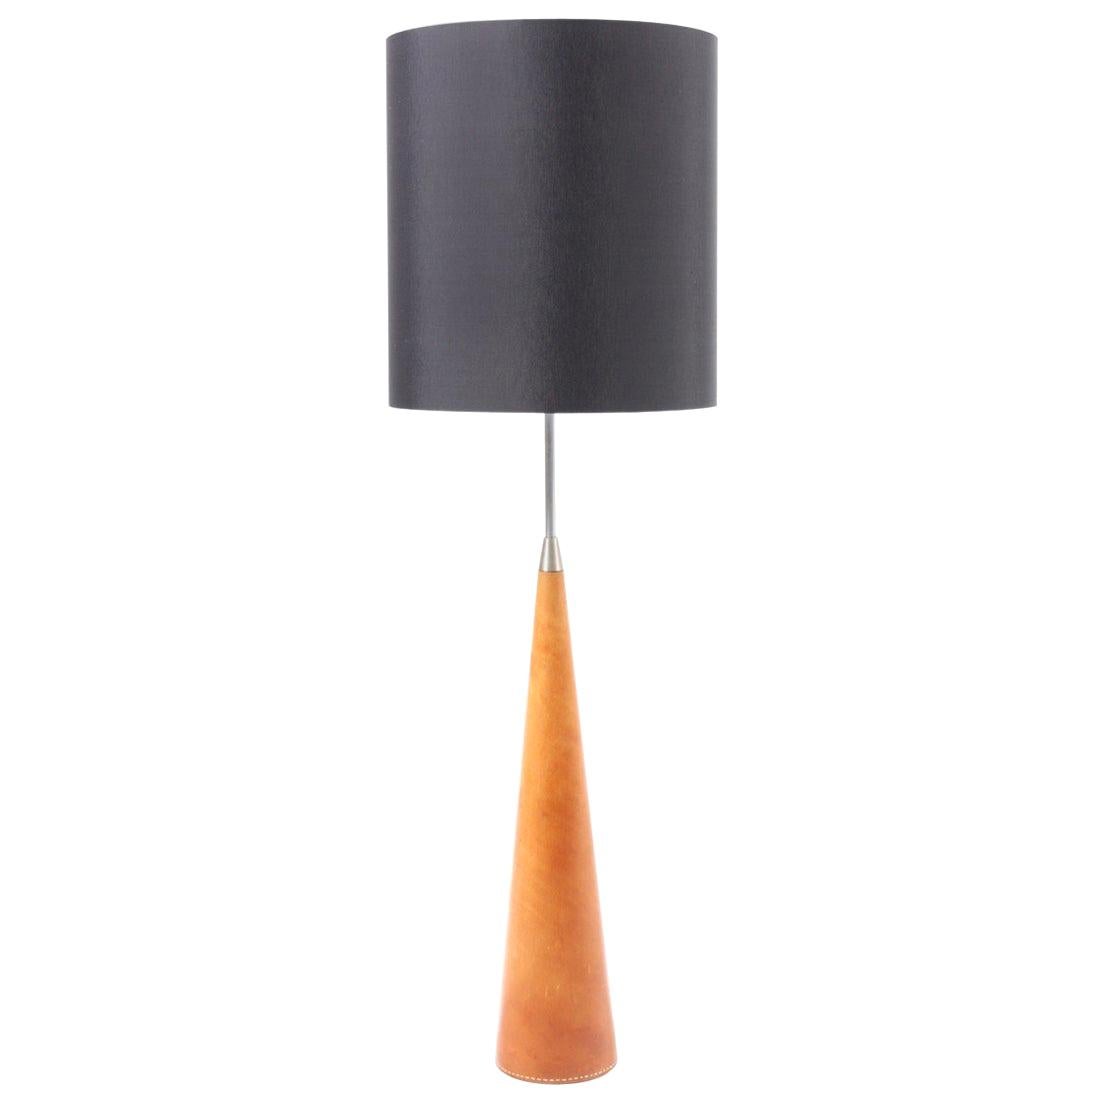 Danish Midcentury Table Lamp in Patinated Leather, 1950s